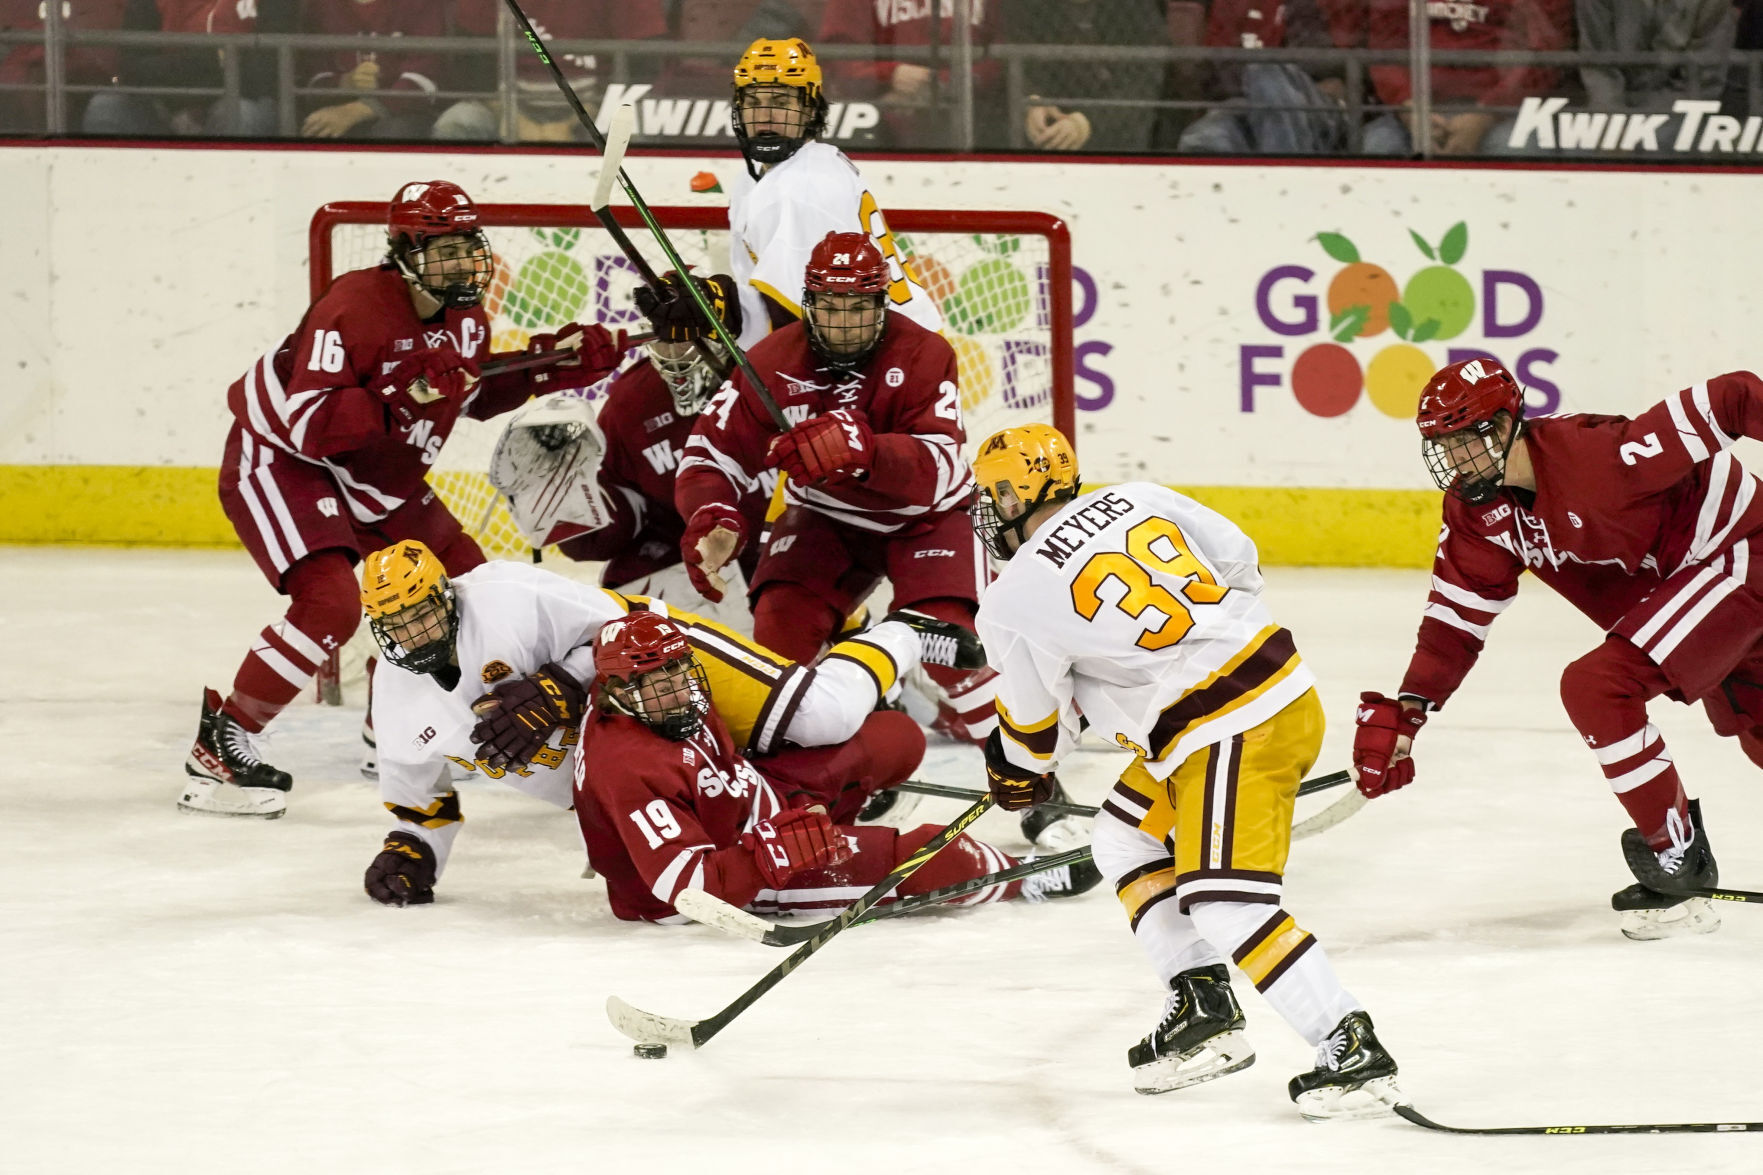 Milewski on Hockey How recruits view the struggles of the Wisconsin mens team